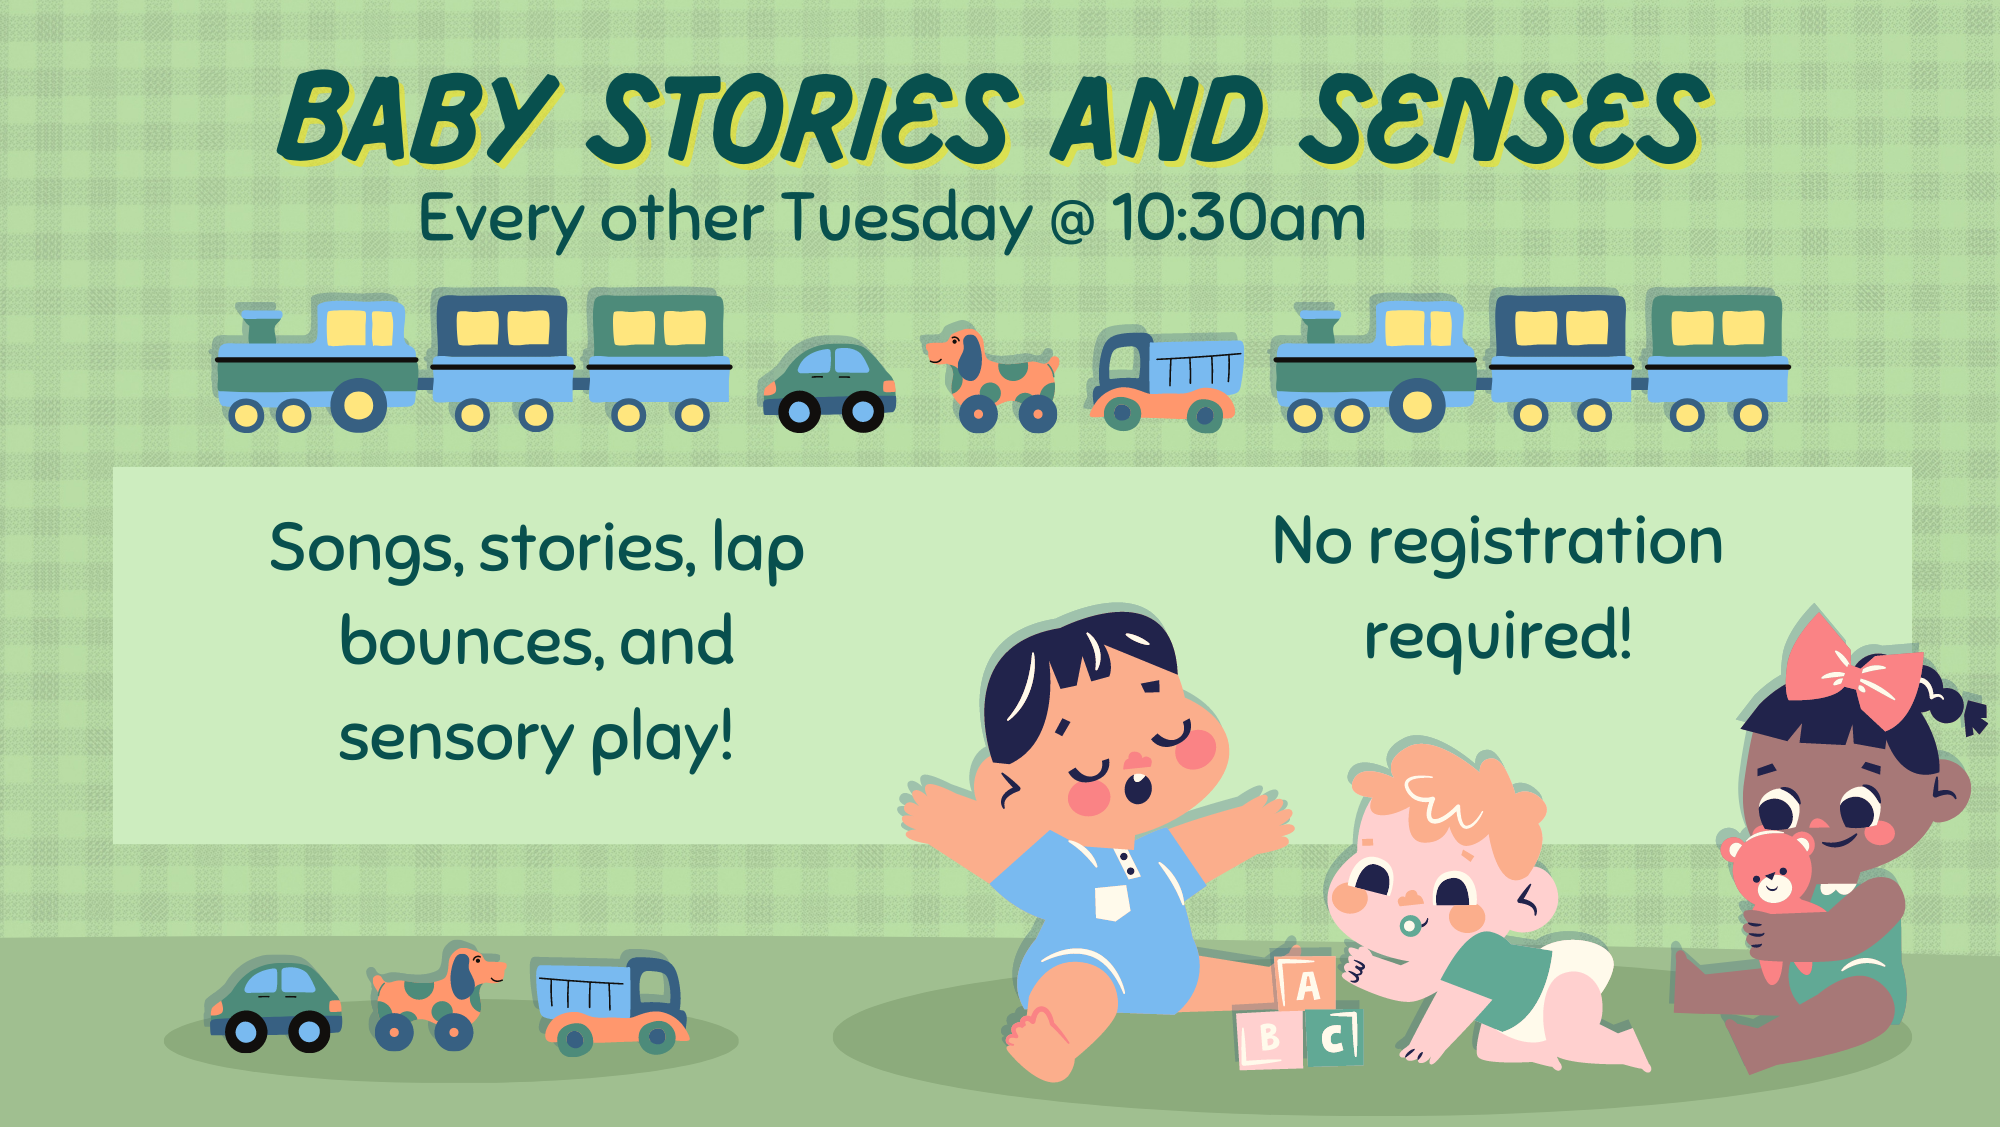 CANCELLED - Baby Stories and Senses